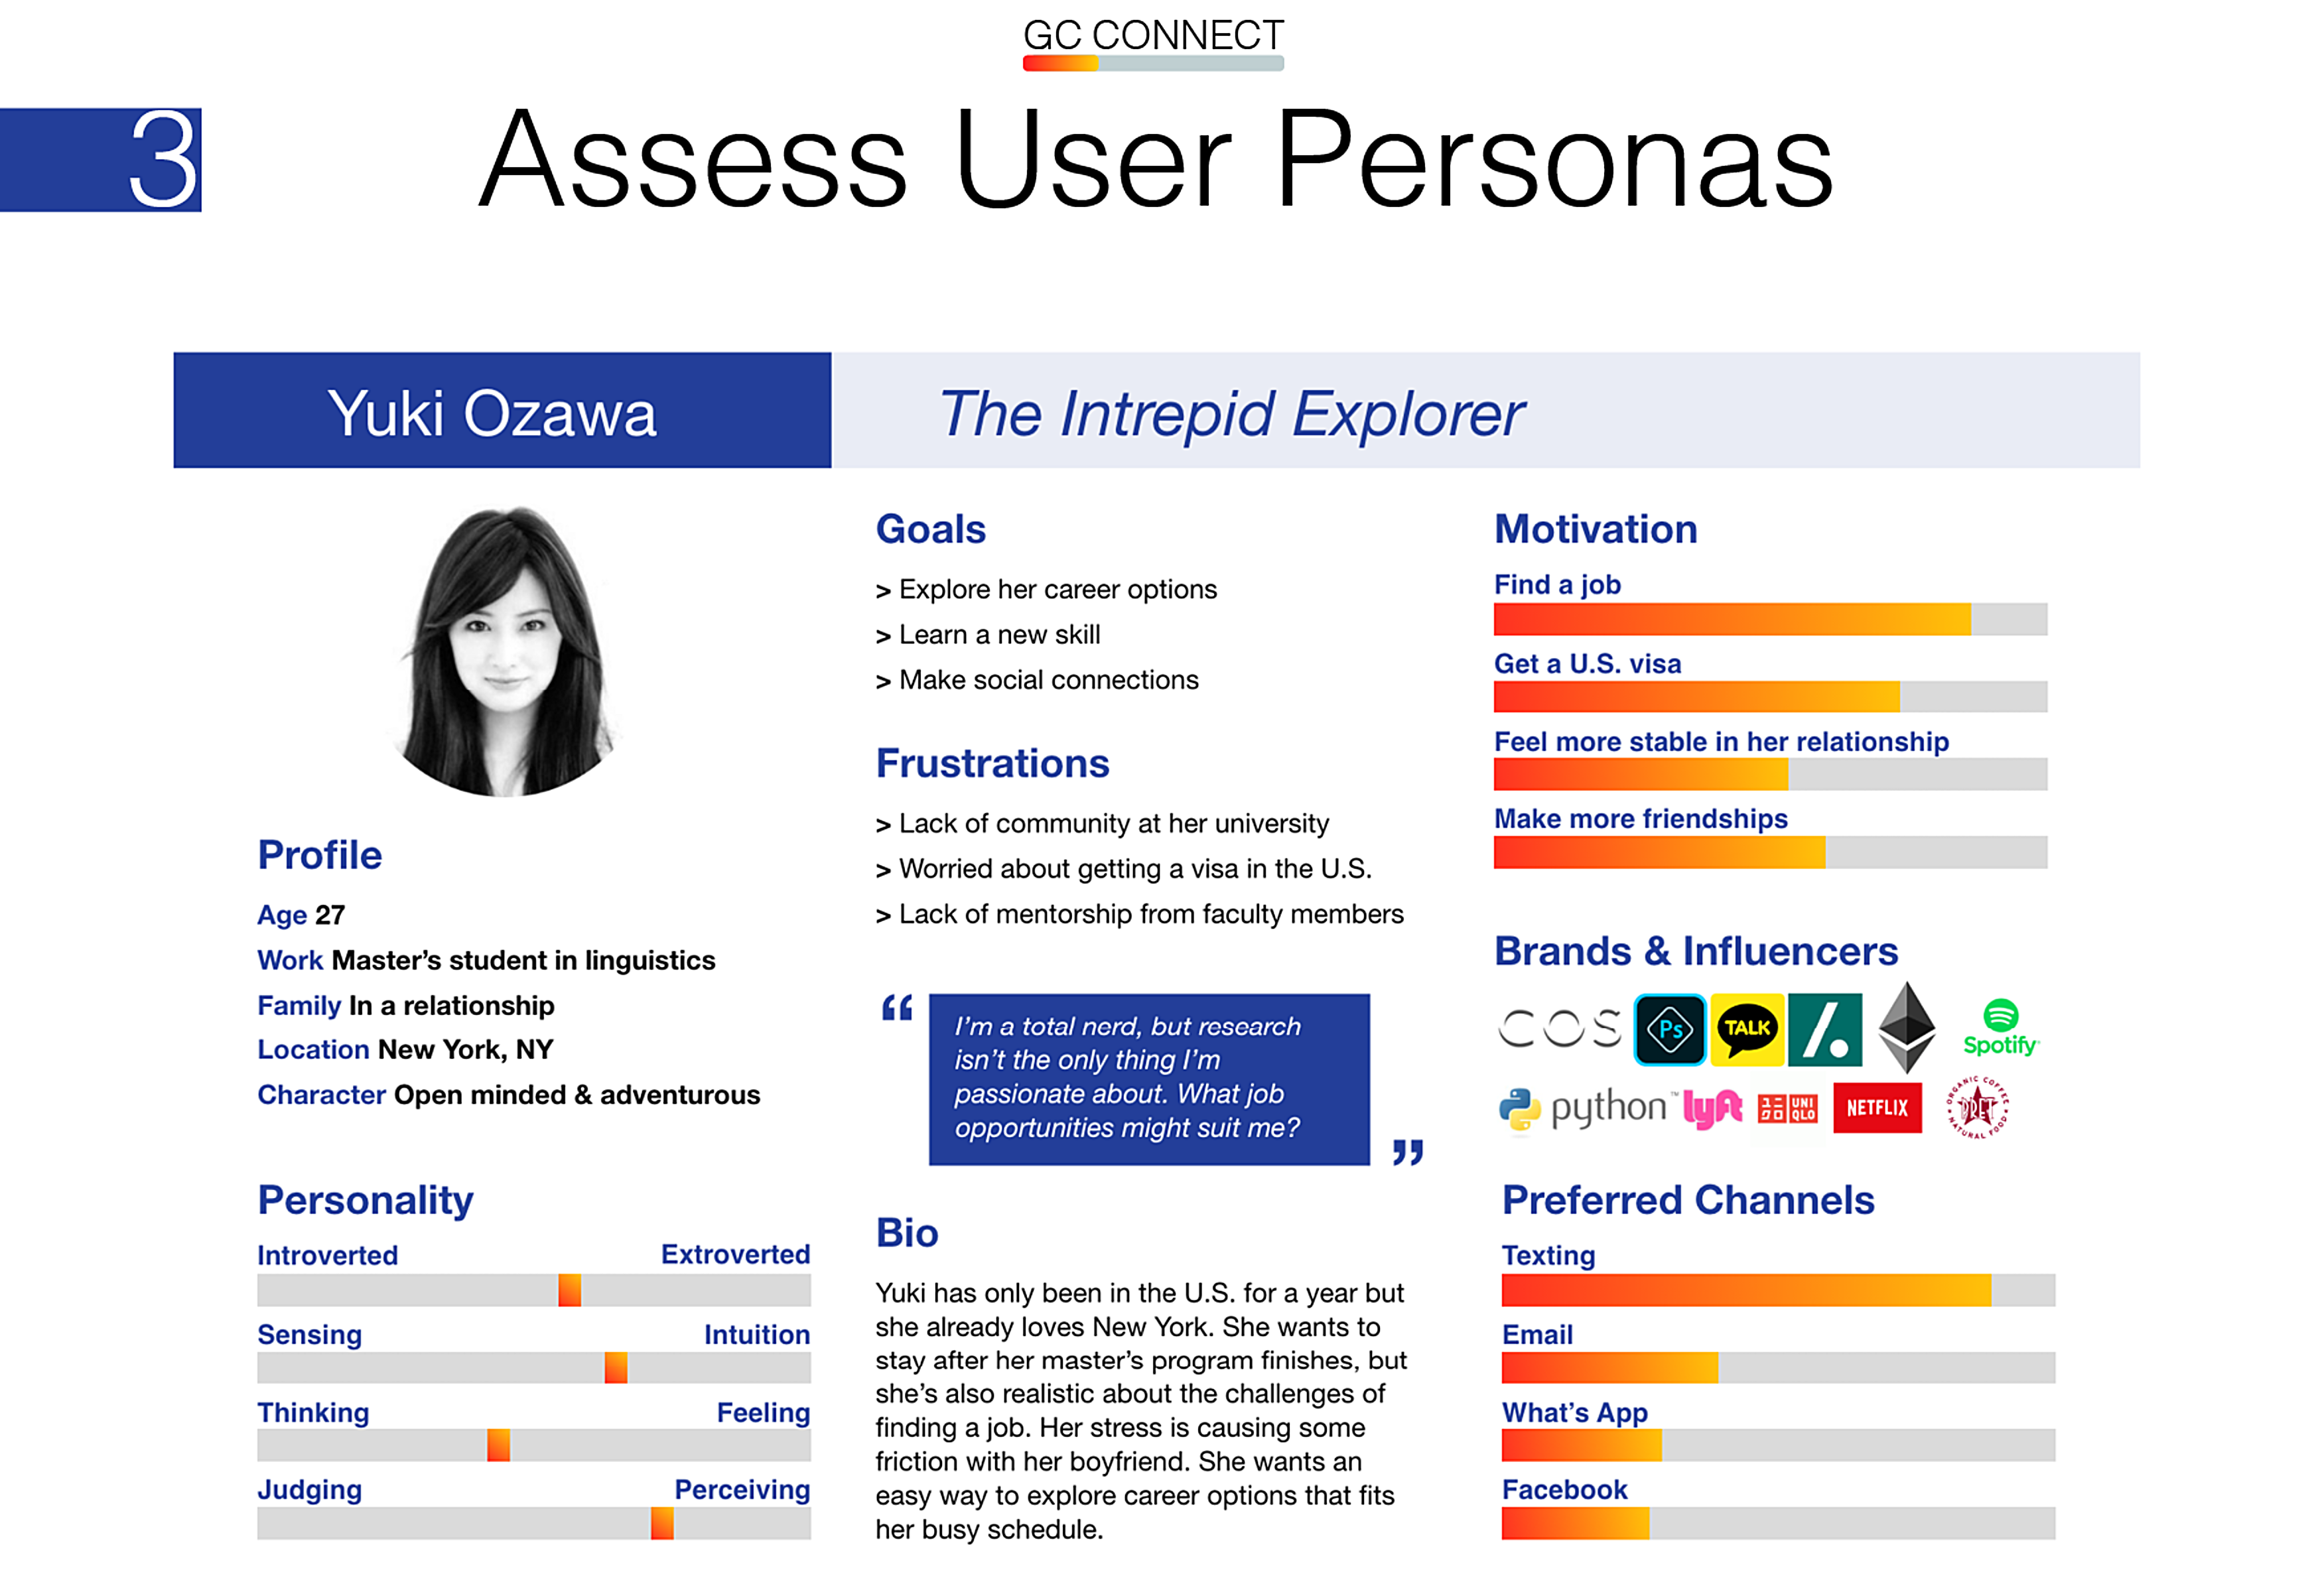 defining our user personas helps us understand our user pain points in ways that build empathy and help us find the best solution